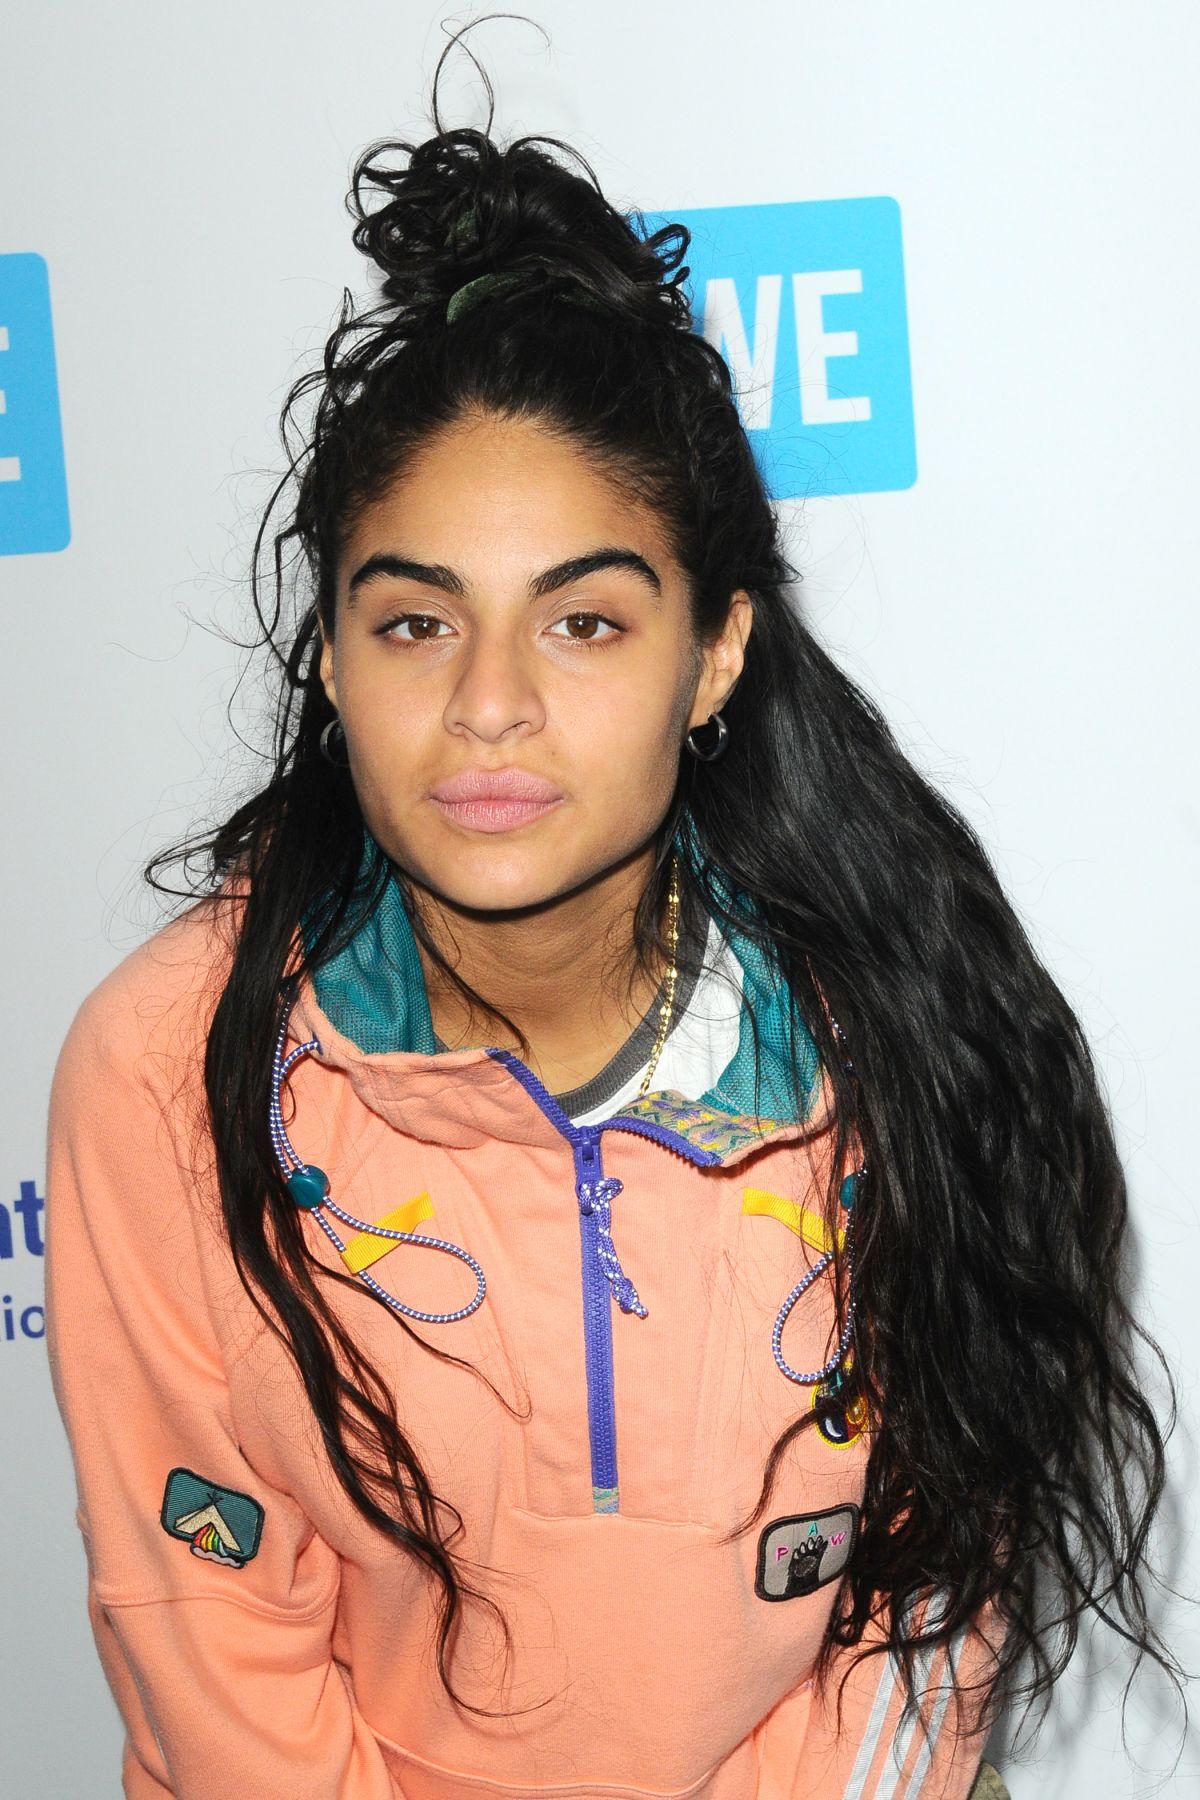 51 Hot Pictures Of Jessie Reyez Will Leave You Flabbergasted By Her Hot Magnificence 524